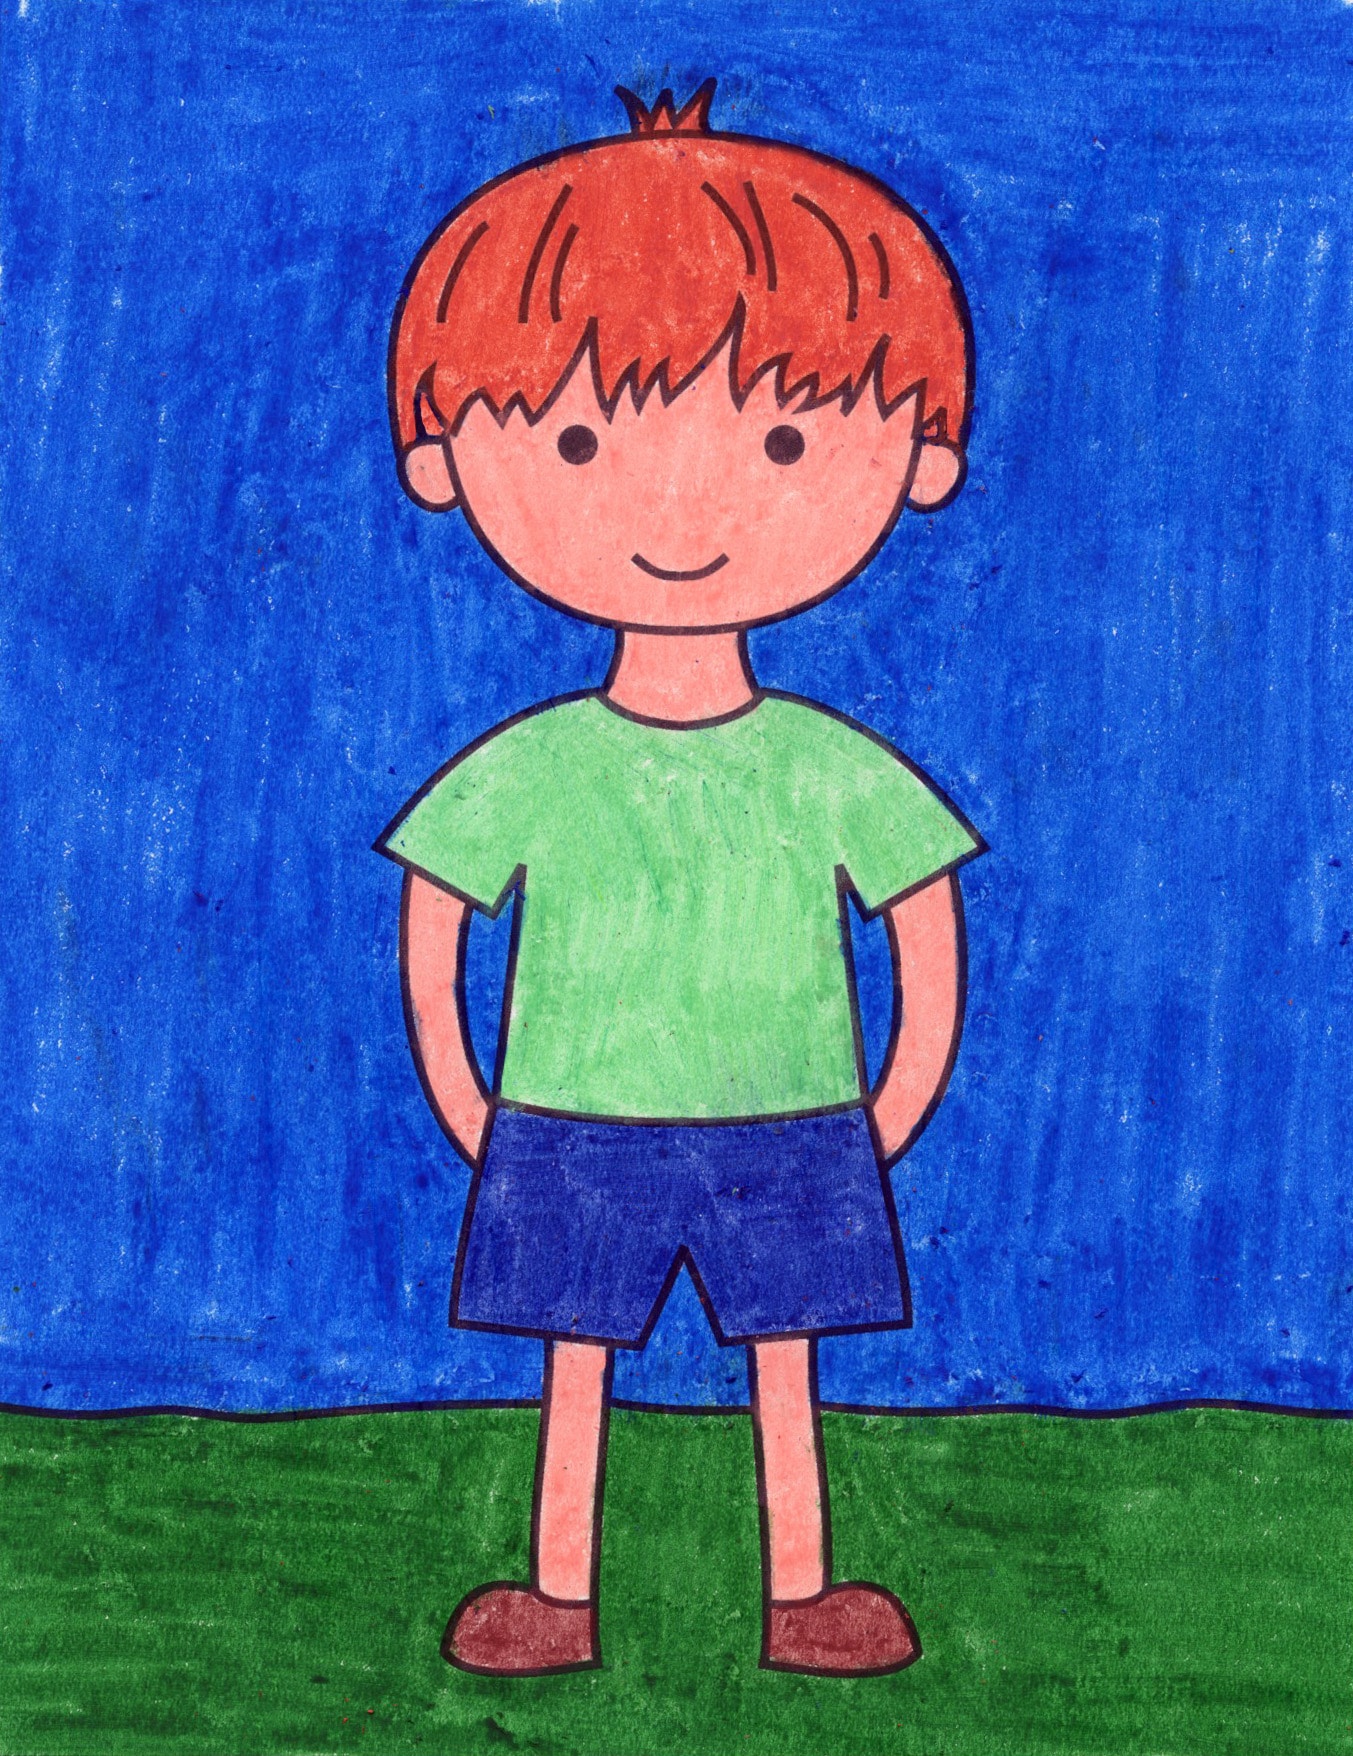 How To Draw A Boy In Shorts Art Projects For Kids See more ideas about character design, drawings, sketches. how to draw a boy in shorts art